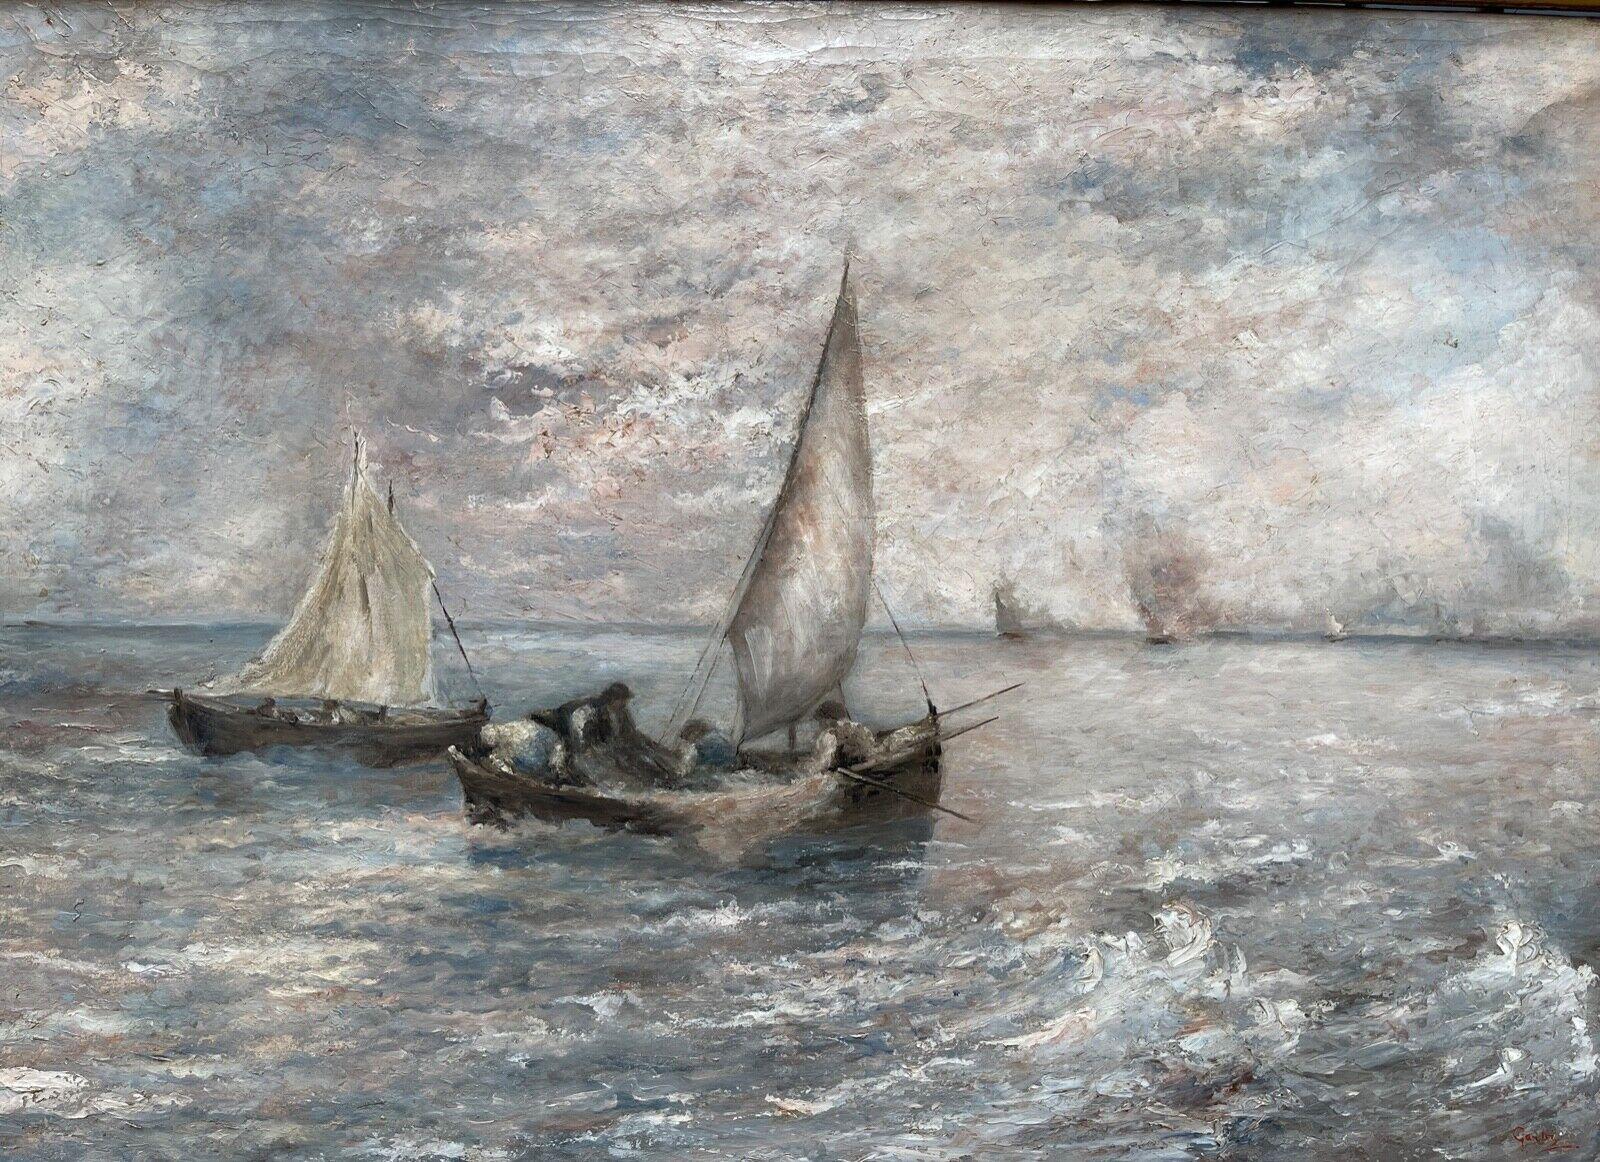 Antique painting, oil on canvas, Marina, 19th century, Macchiaioli school

Elegant antique painting, made with skill, oil on canvas, marine scene, a stormy sea with sails. 
The painting is signed in the lower right corner 